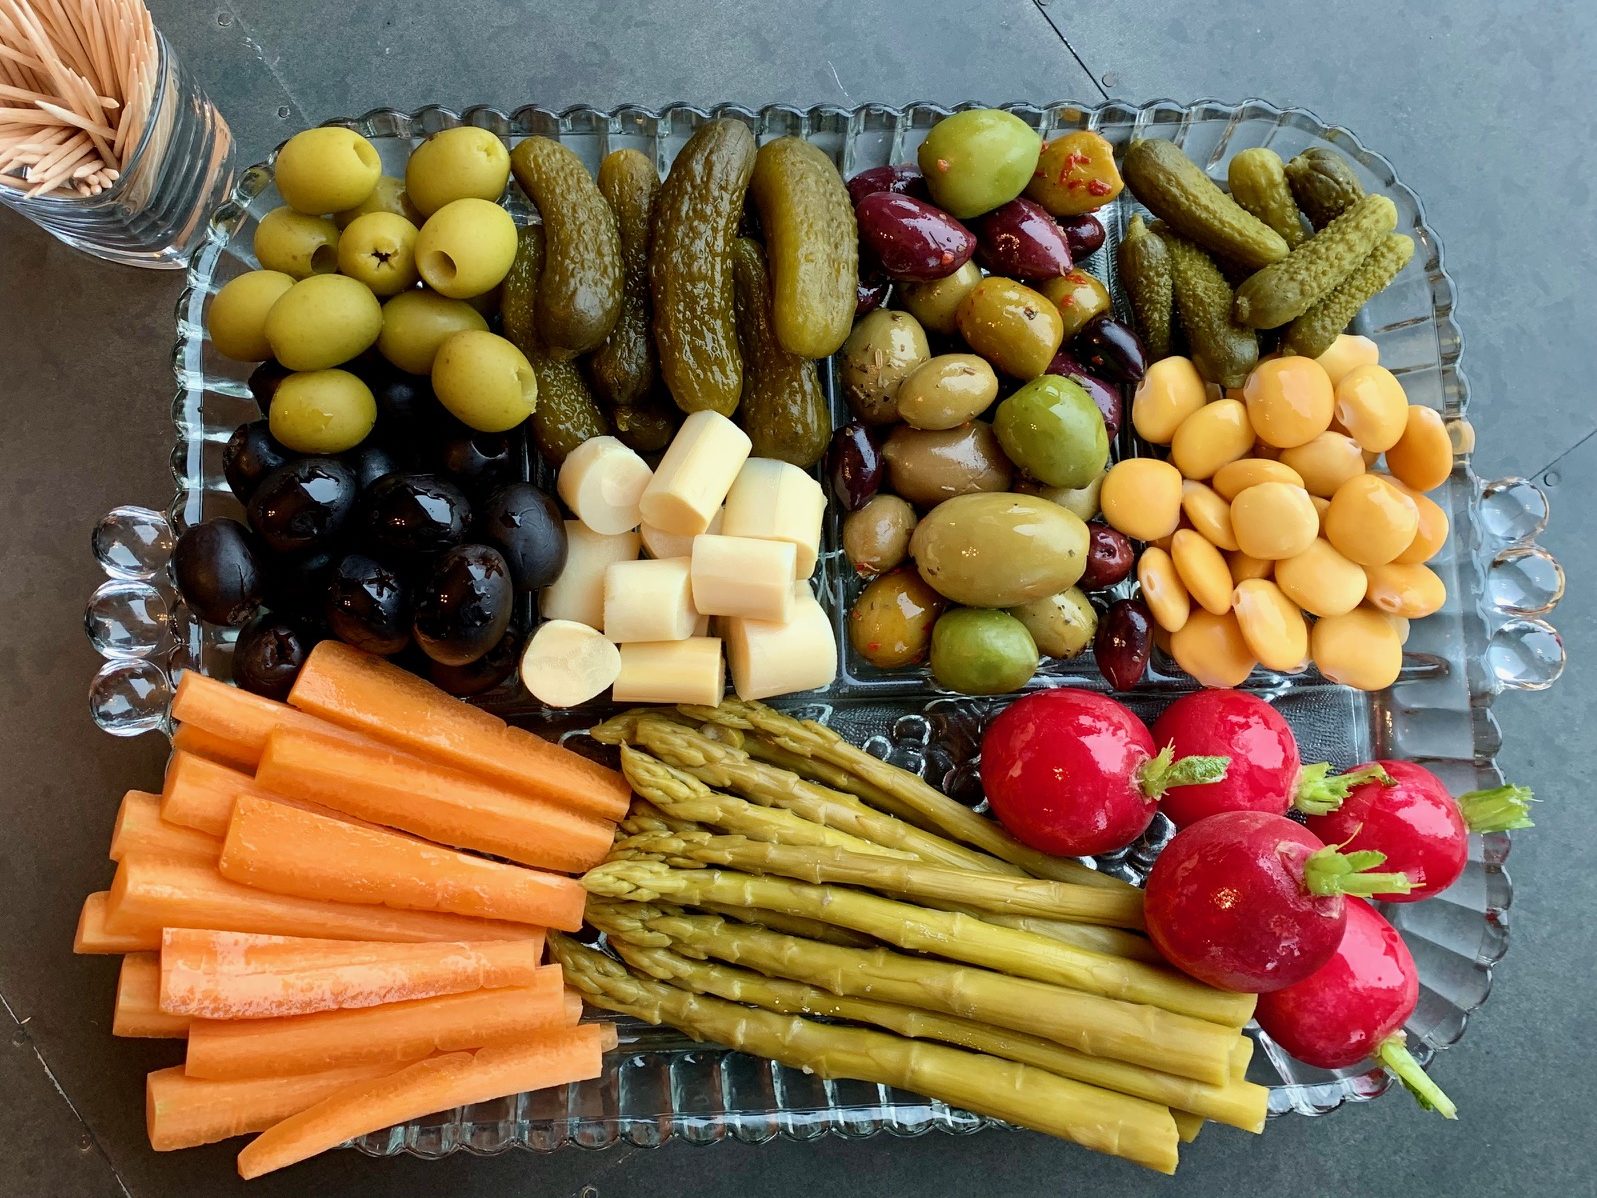 What Is a Relish Tray and What Should You Put on It?